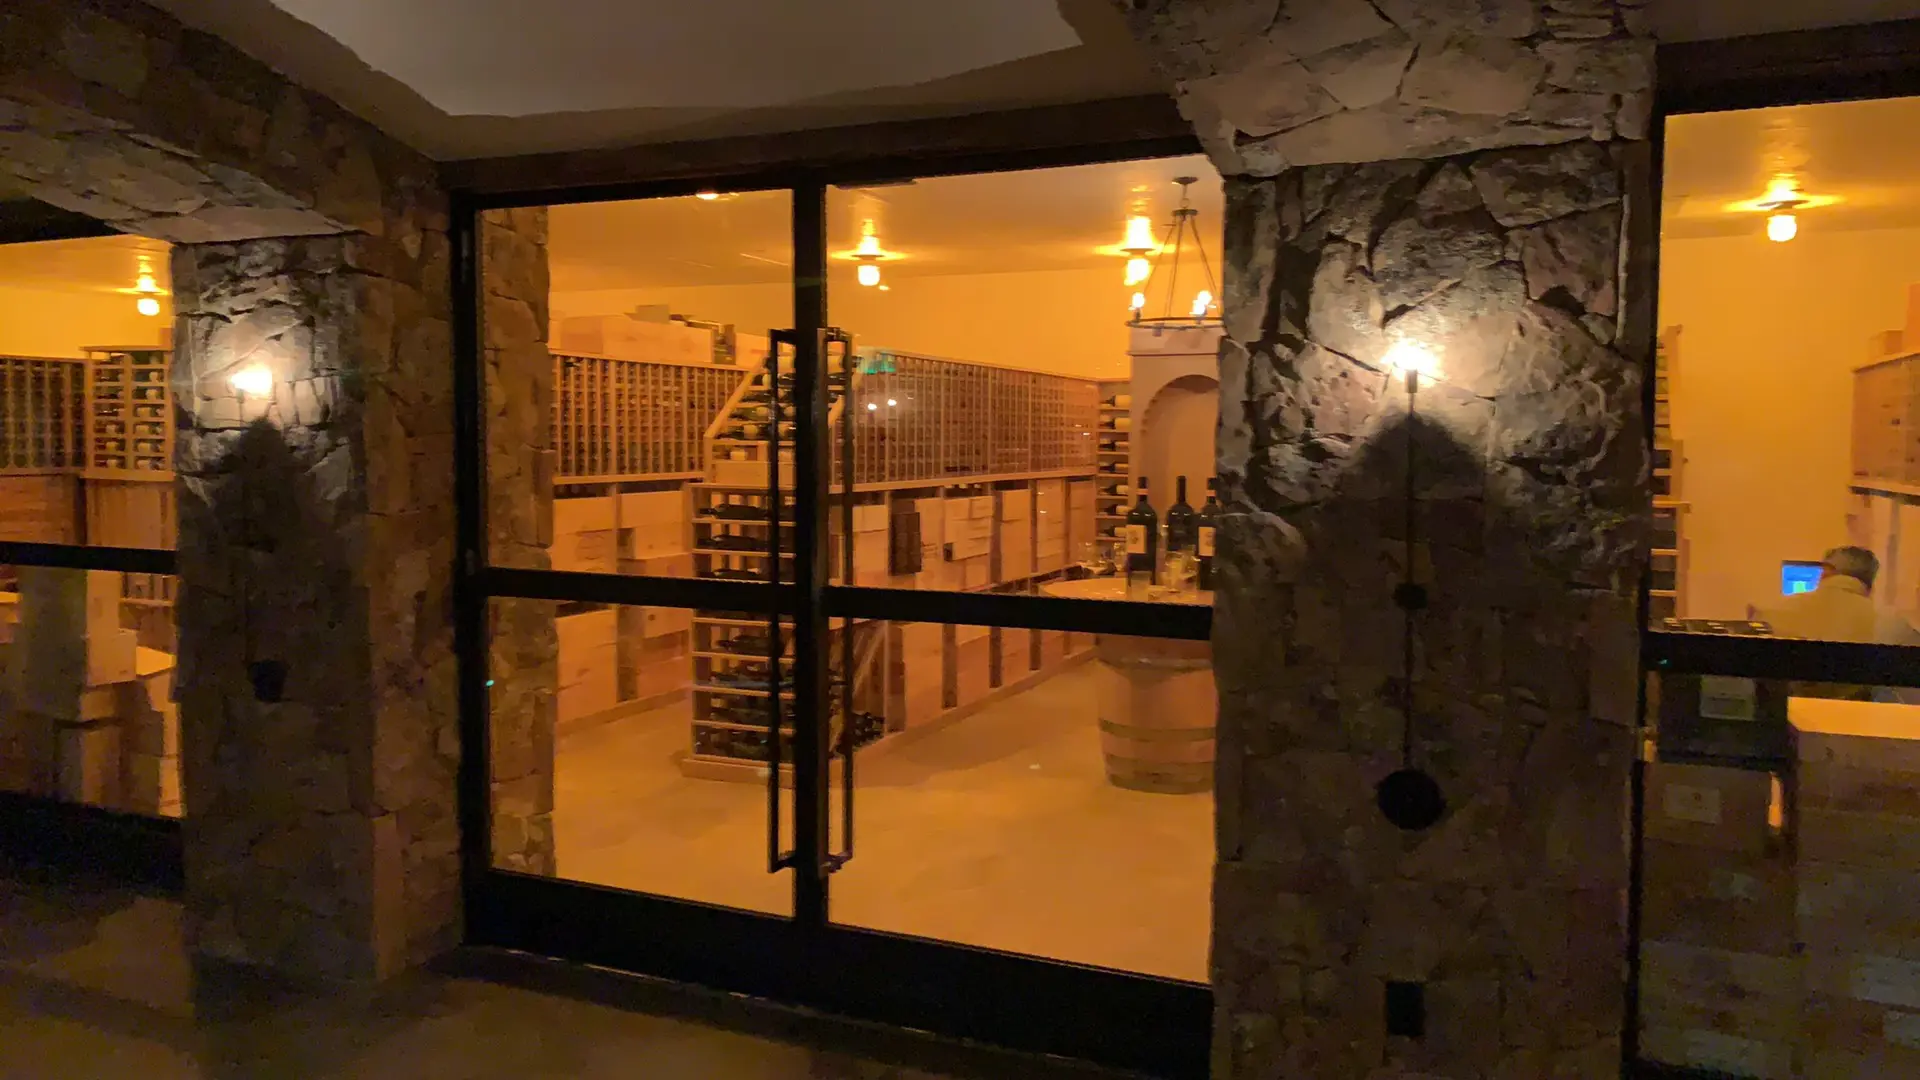 A view of a wine cellar from inside the building.